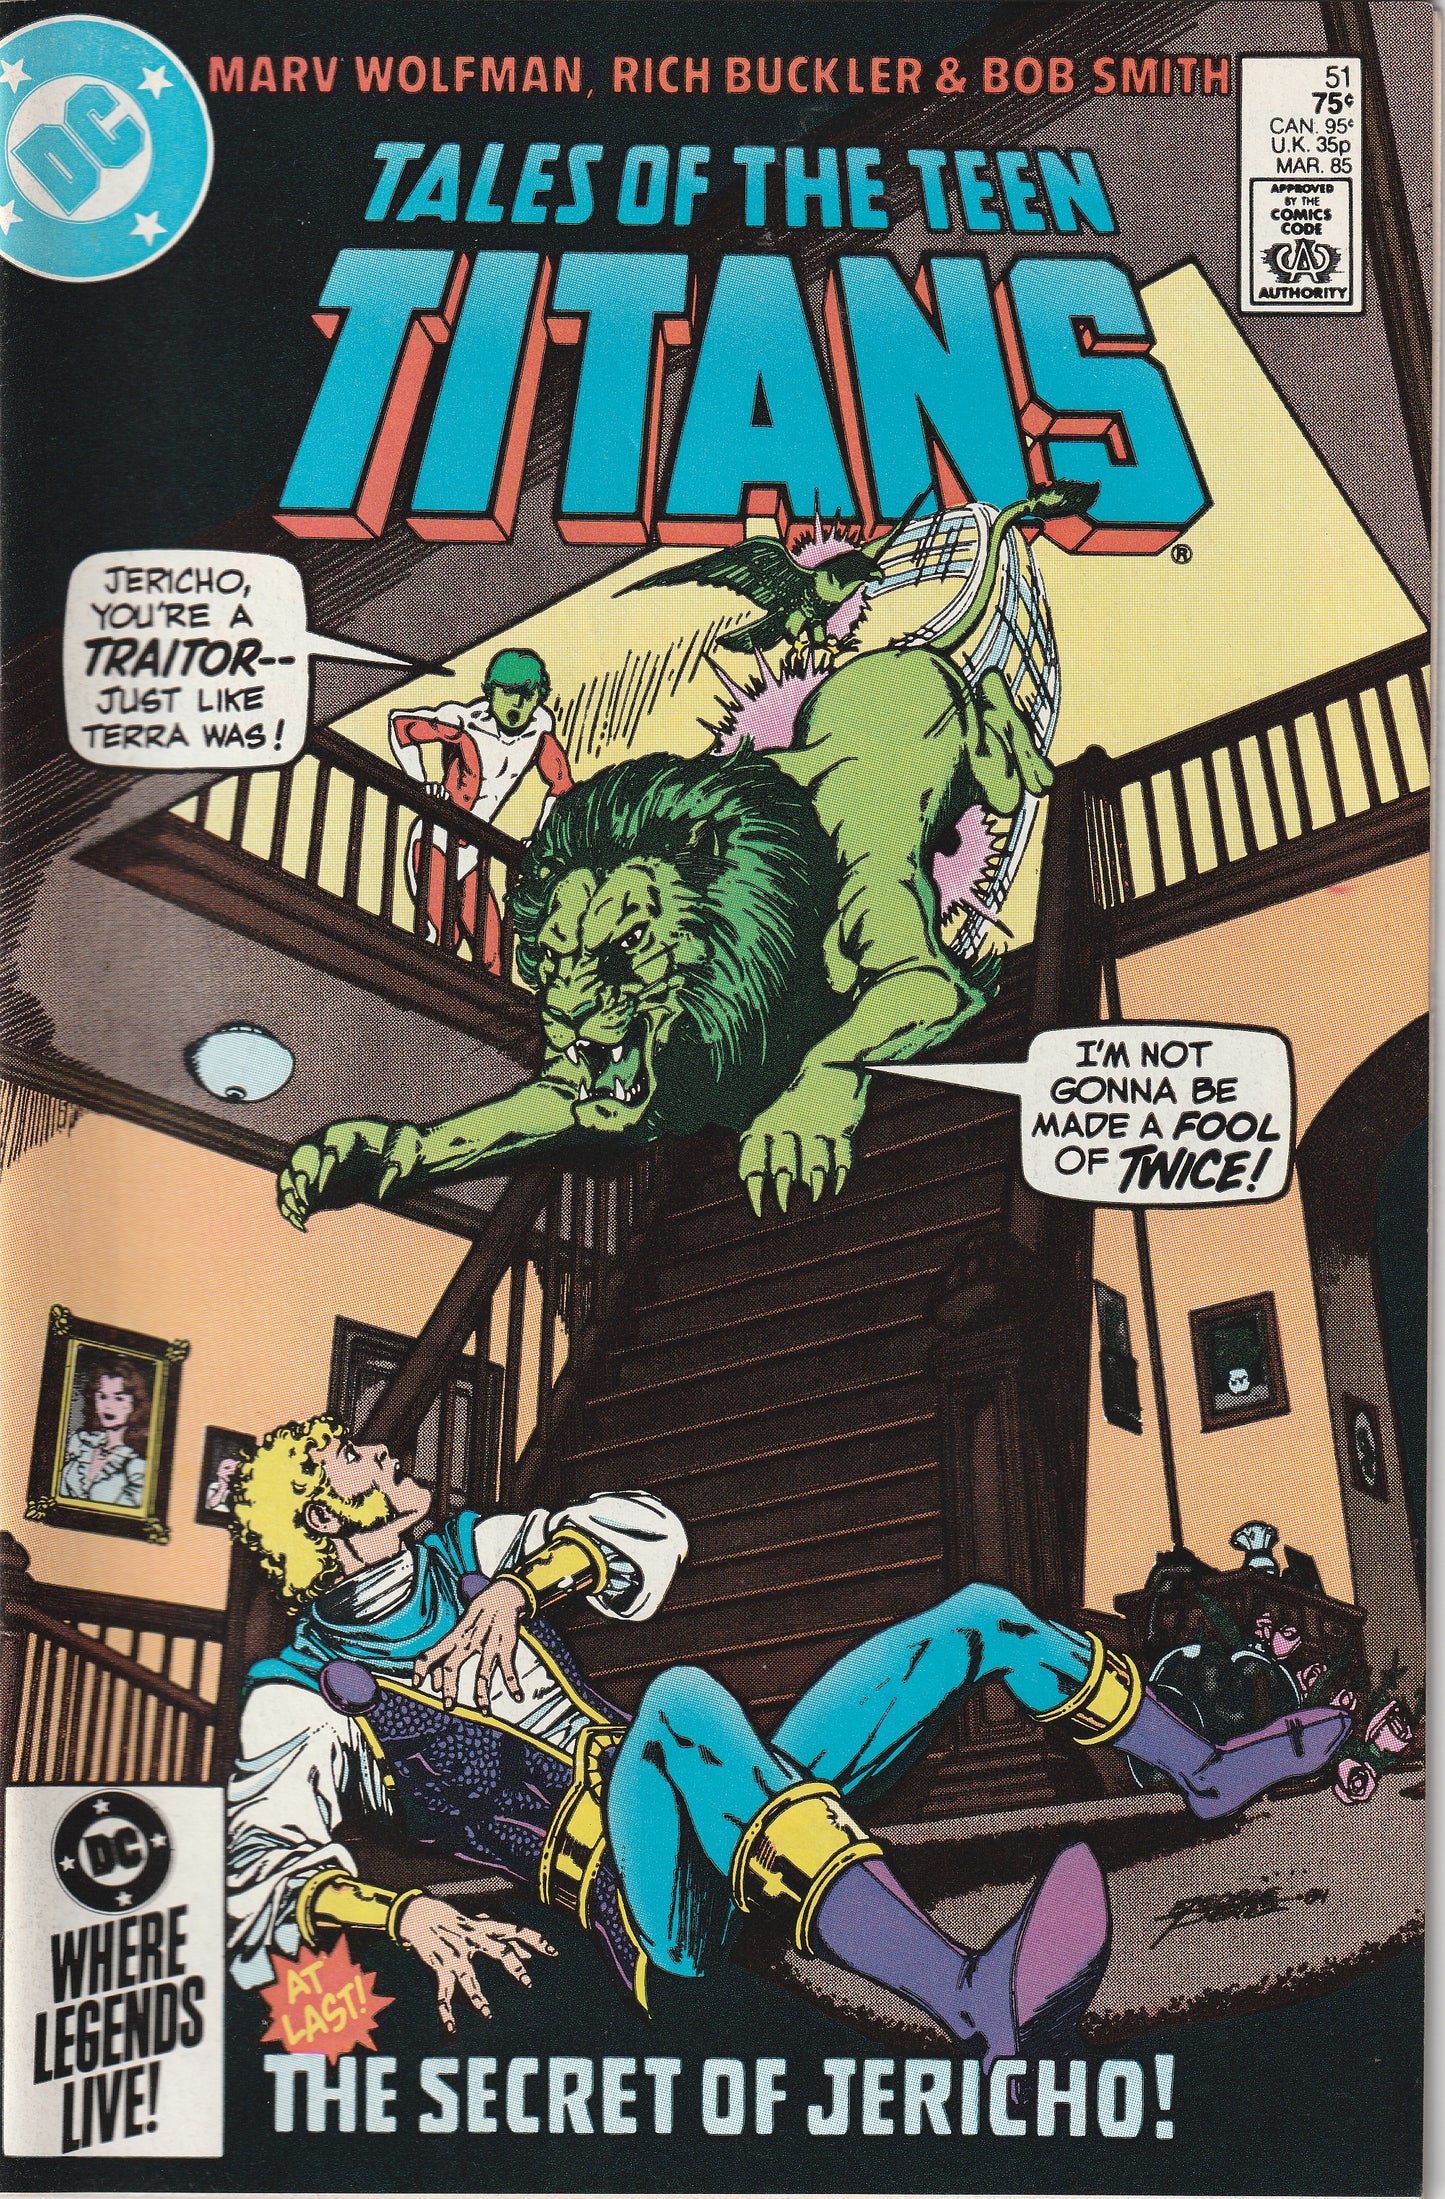 Tales of the Teen Titans #51 (1985) - 1st Appearance of President Marlo